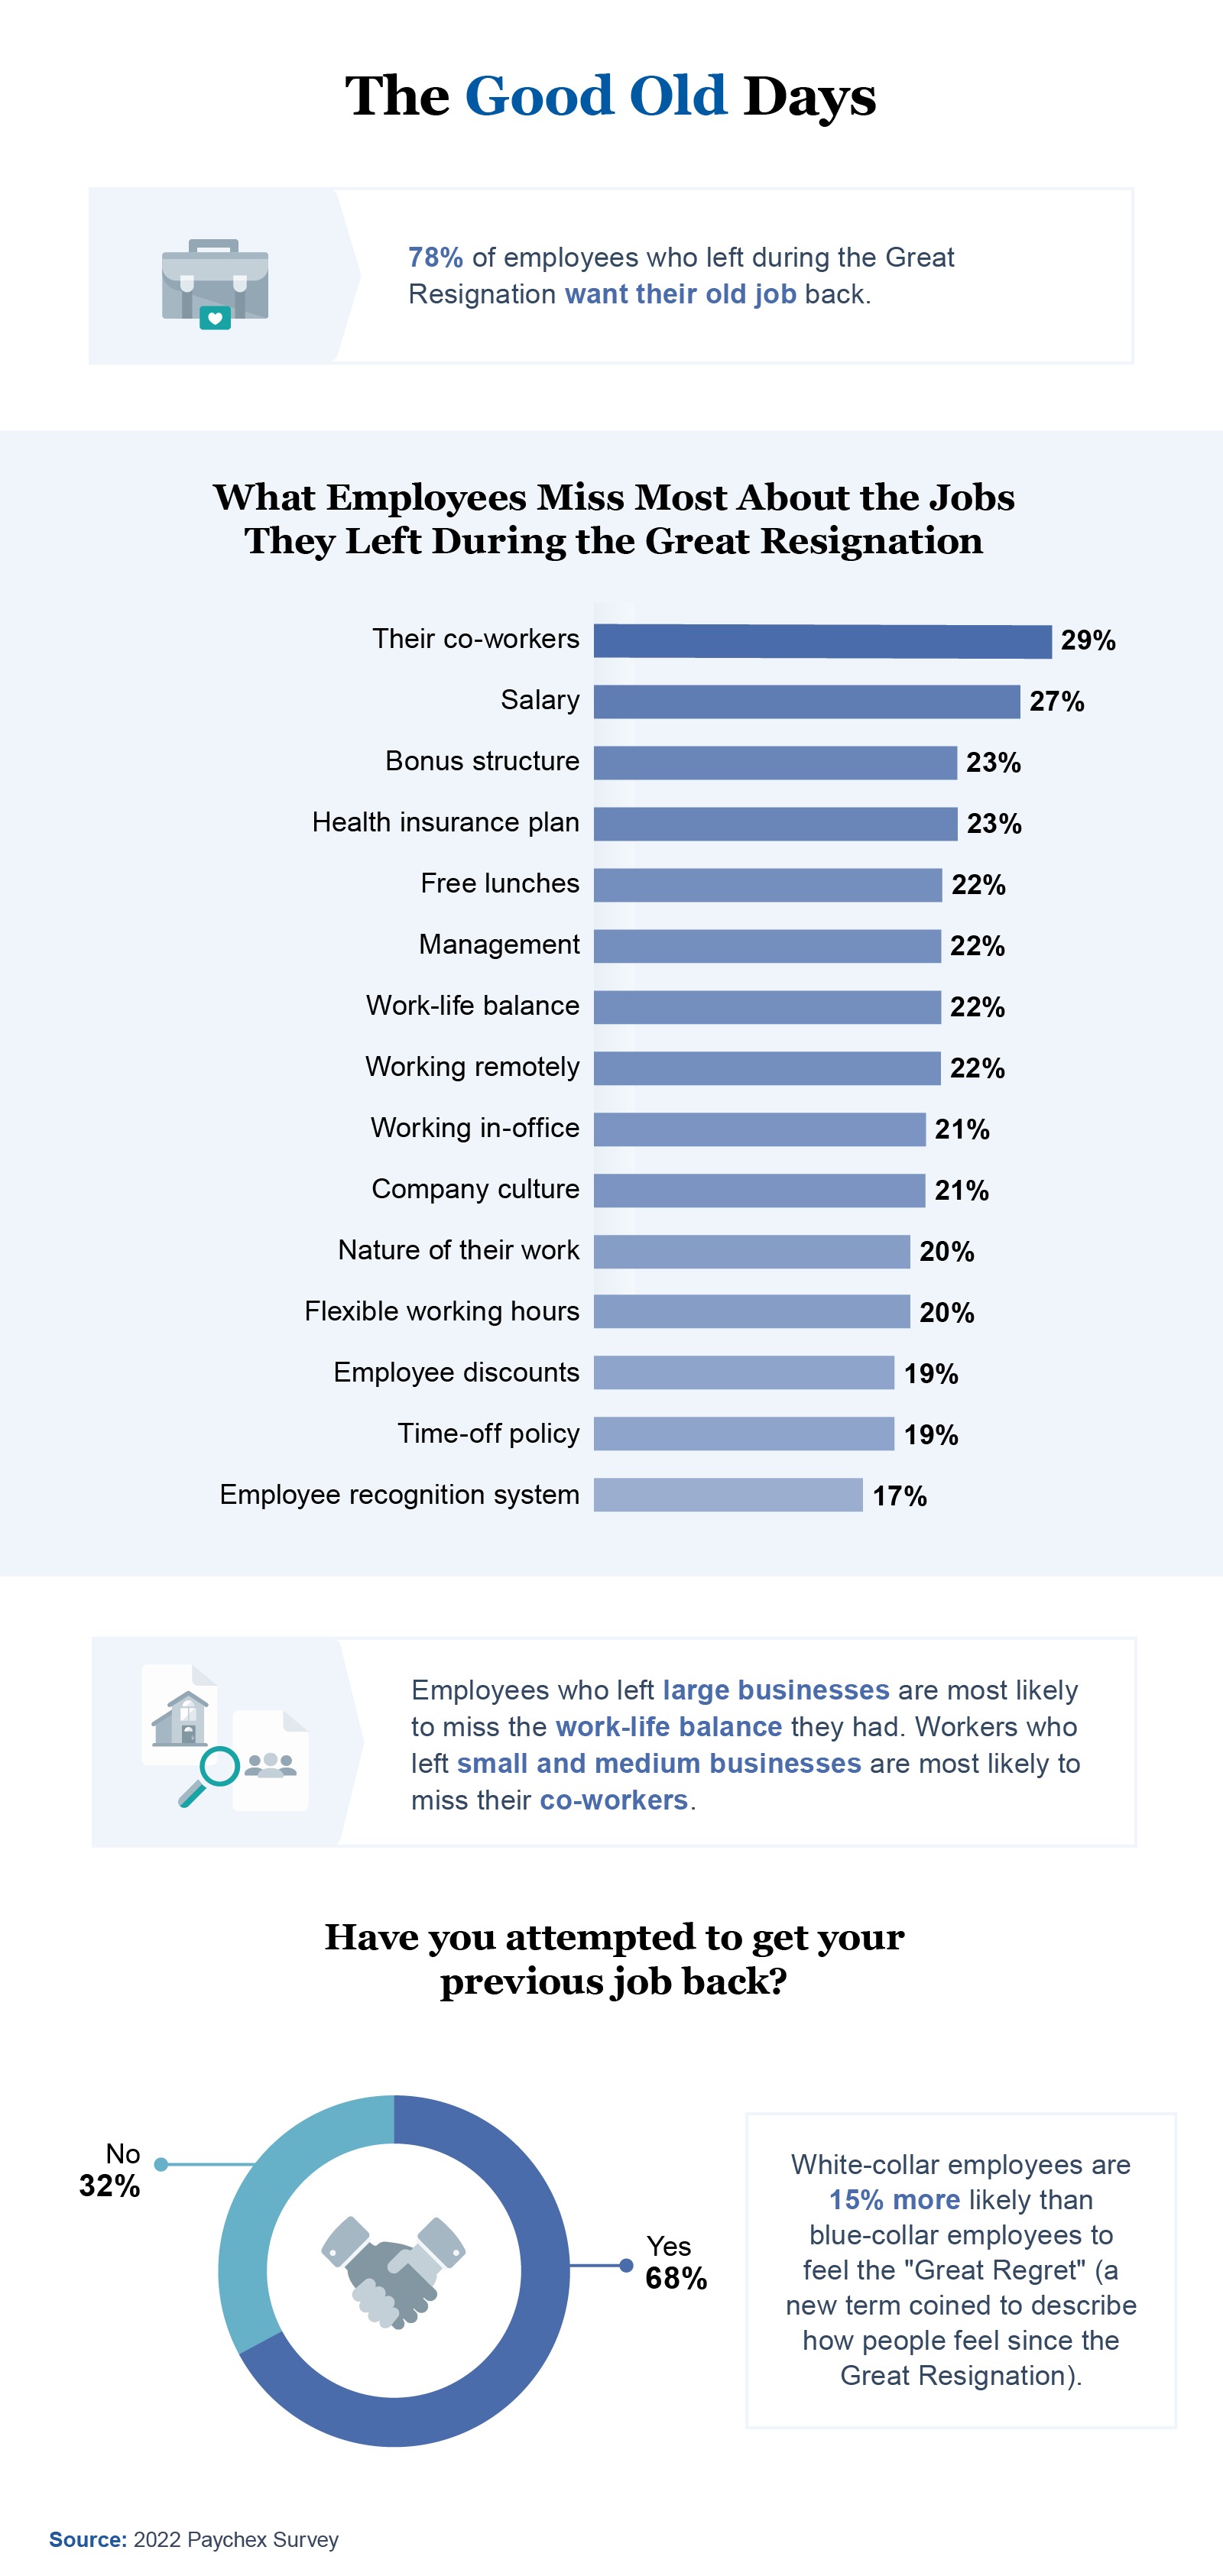 Infographic: What do employees miss most about the jobs they left and have they attempted to get their old jobs back?